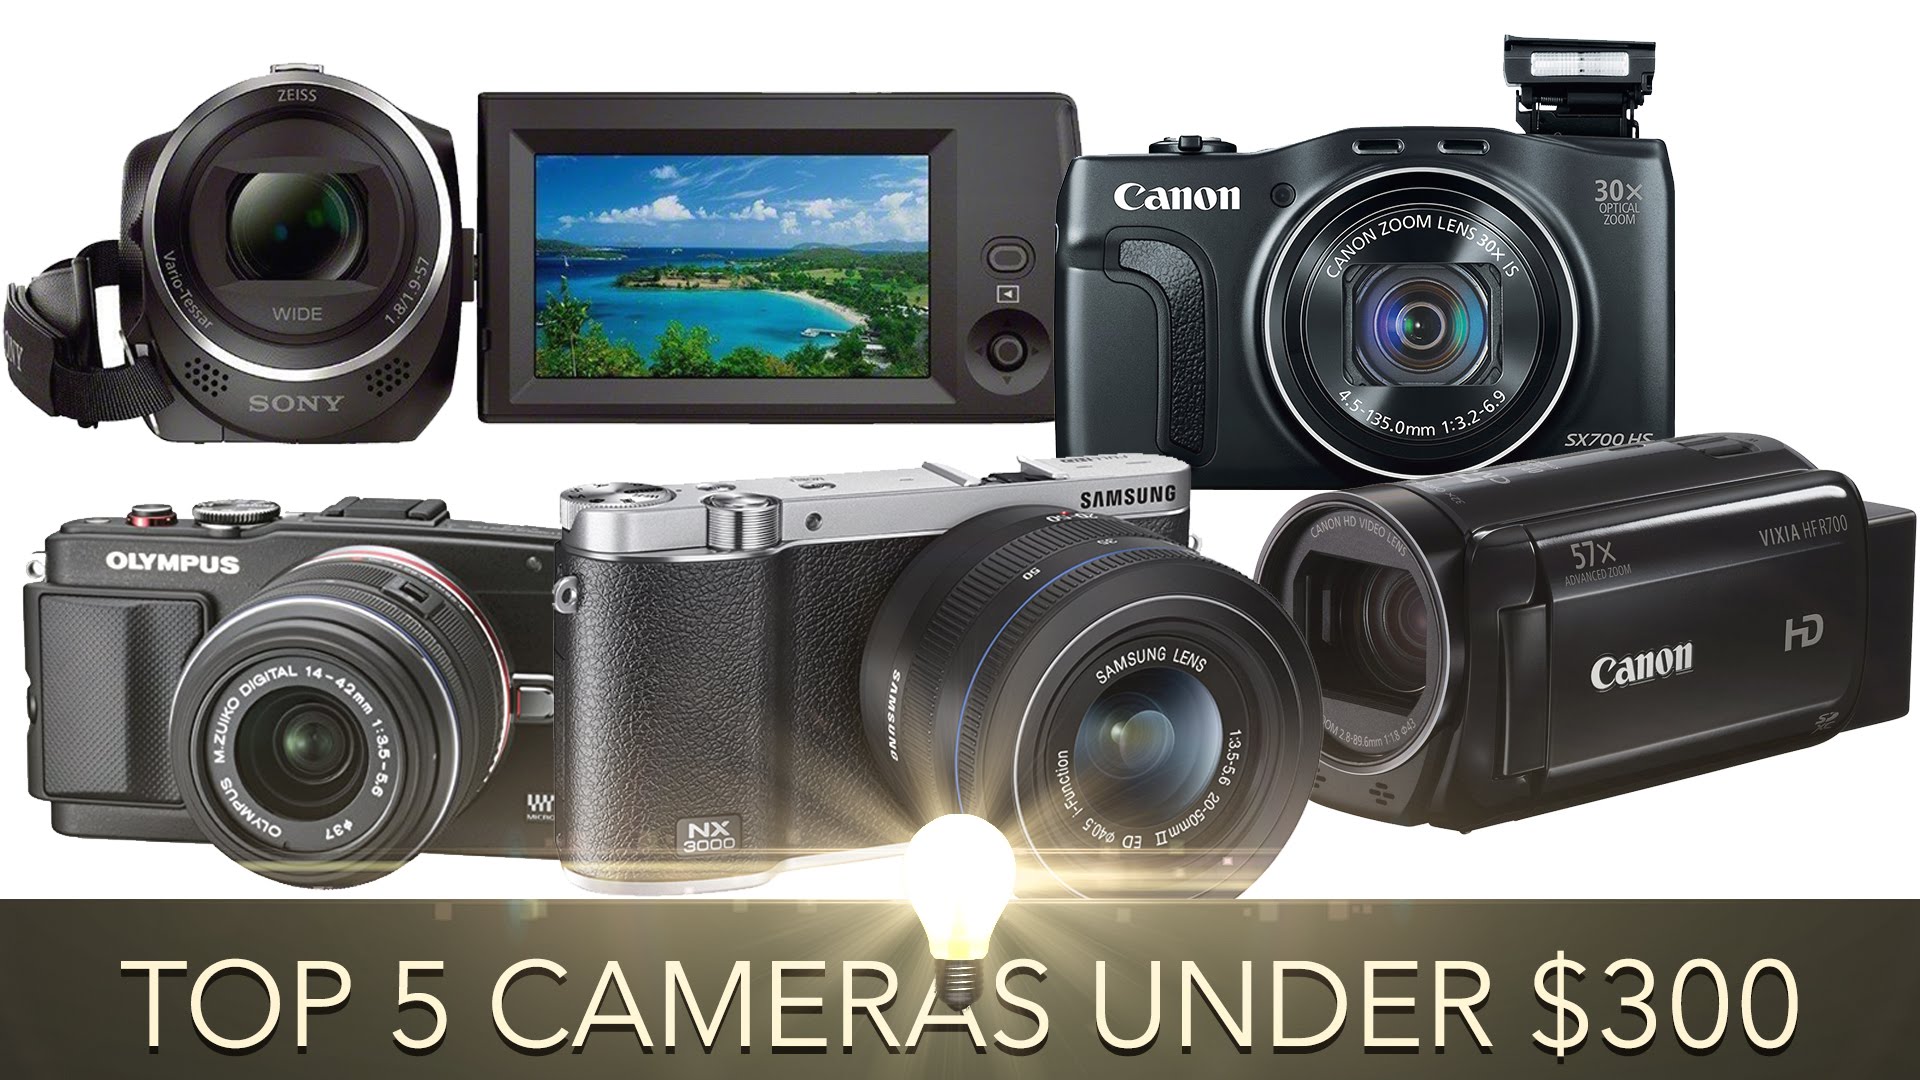 Top 5 Cameras For YouTube and Video Under $300 (2016)